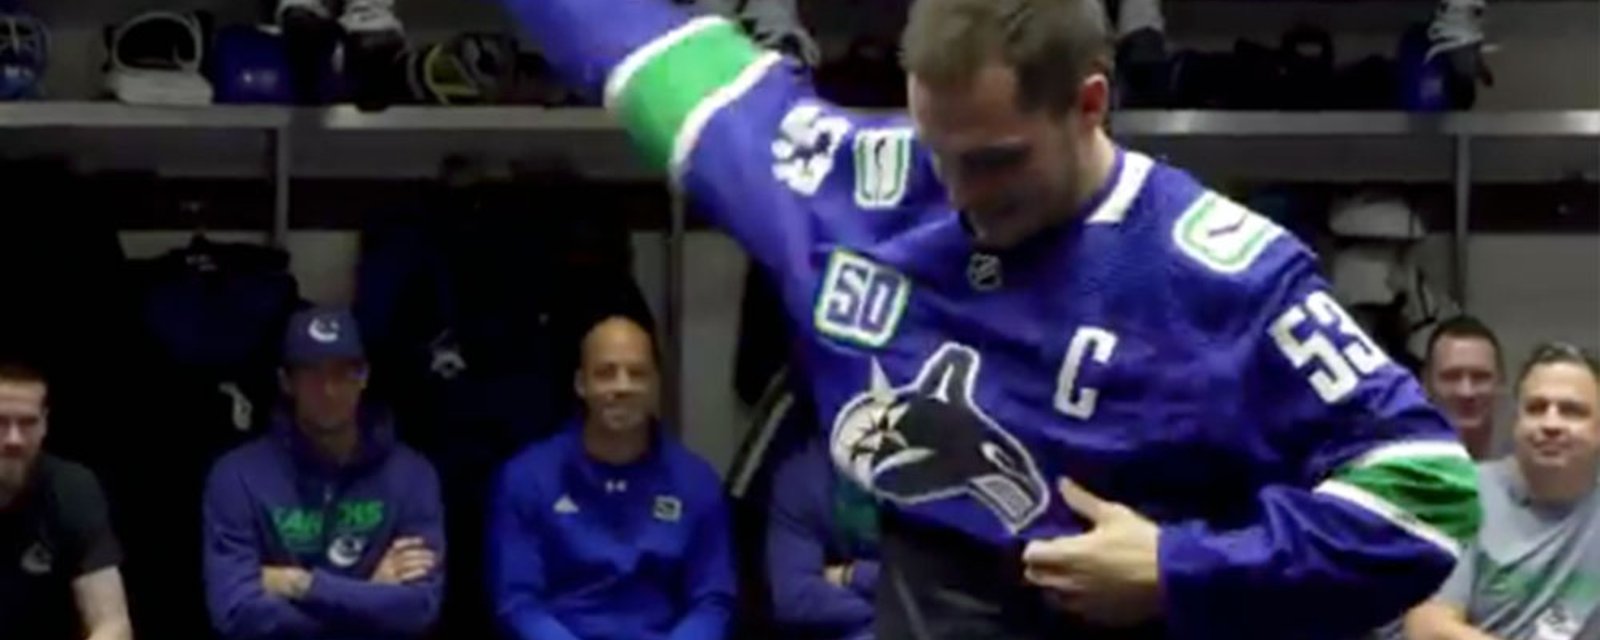 The behind the scenes moment when the Sedin twins presented Bo Horvat with the Canucks captaincy